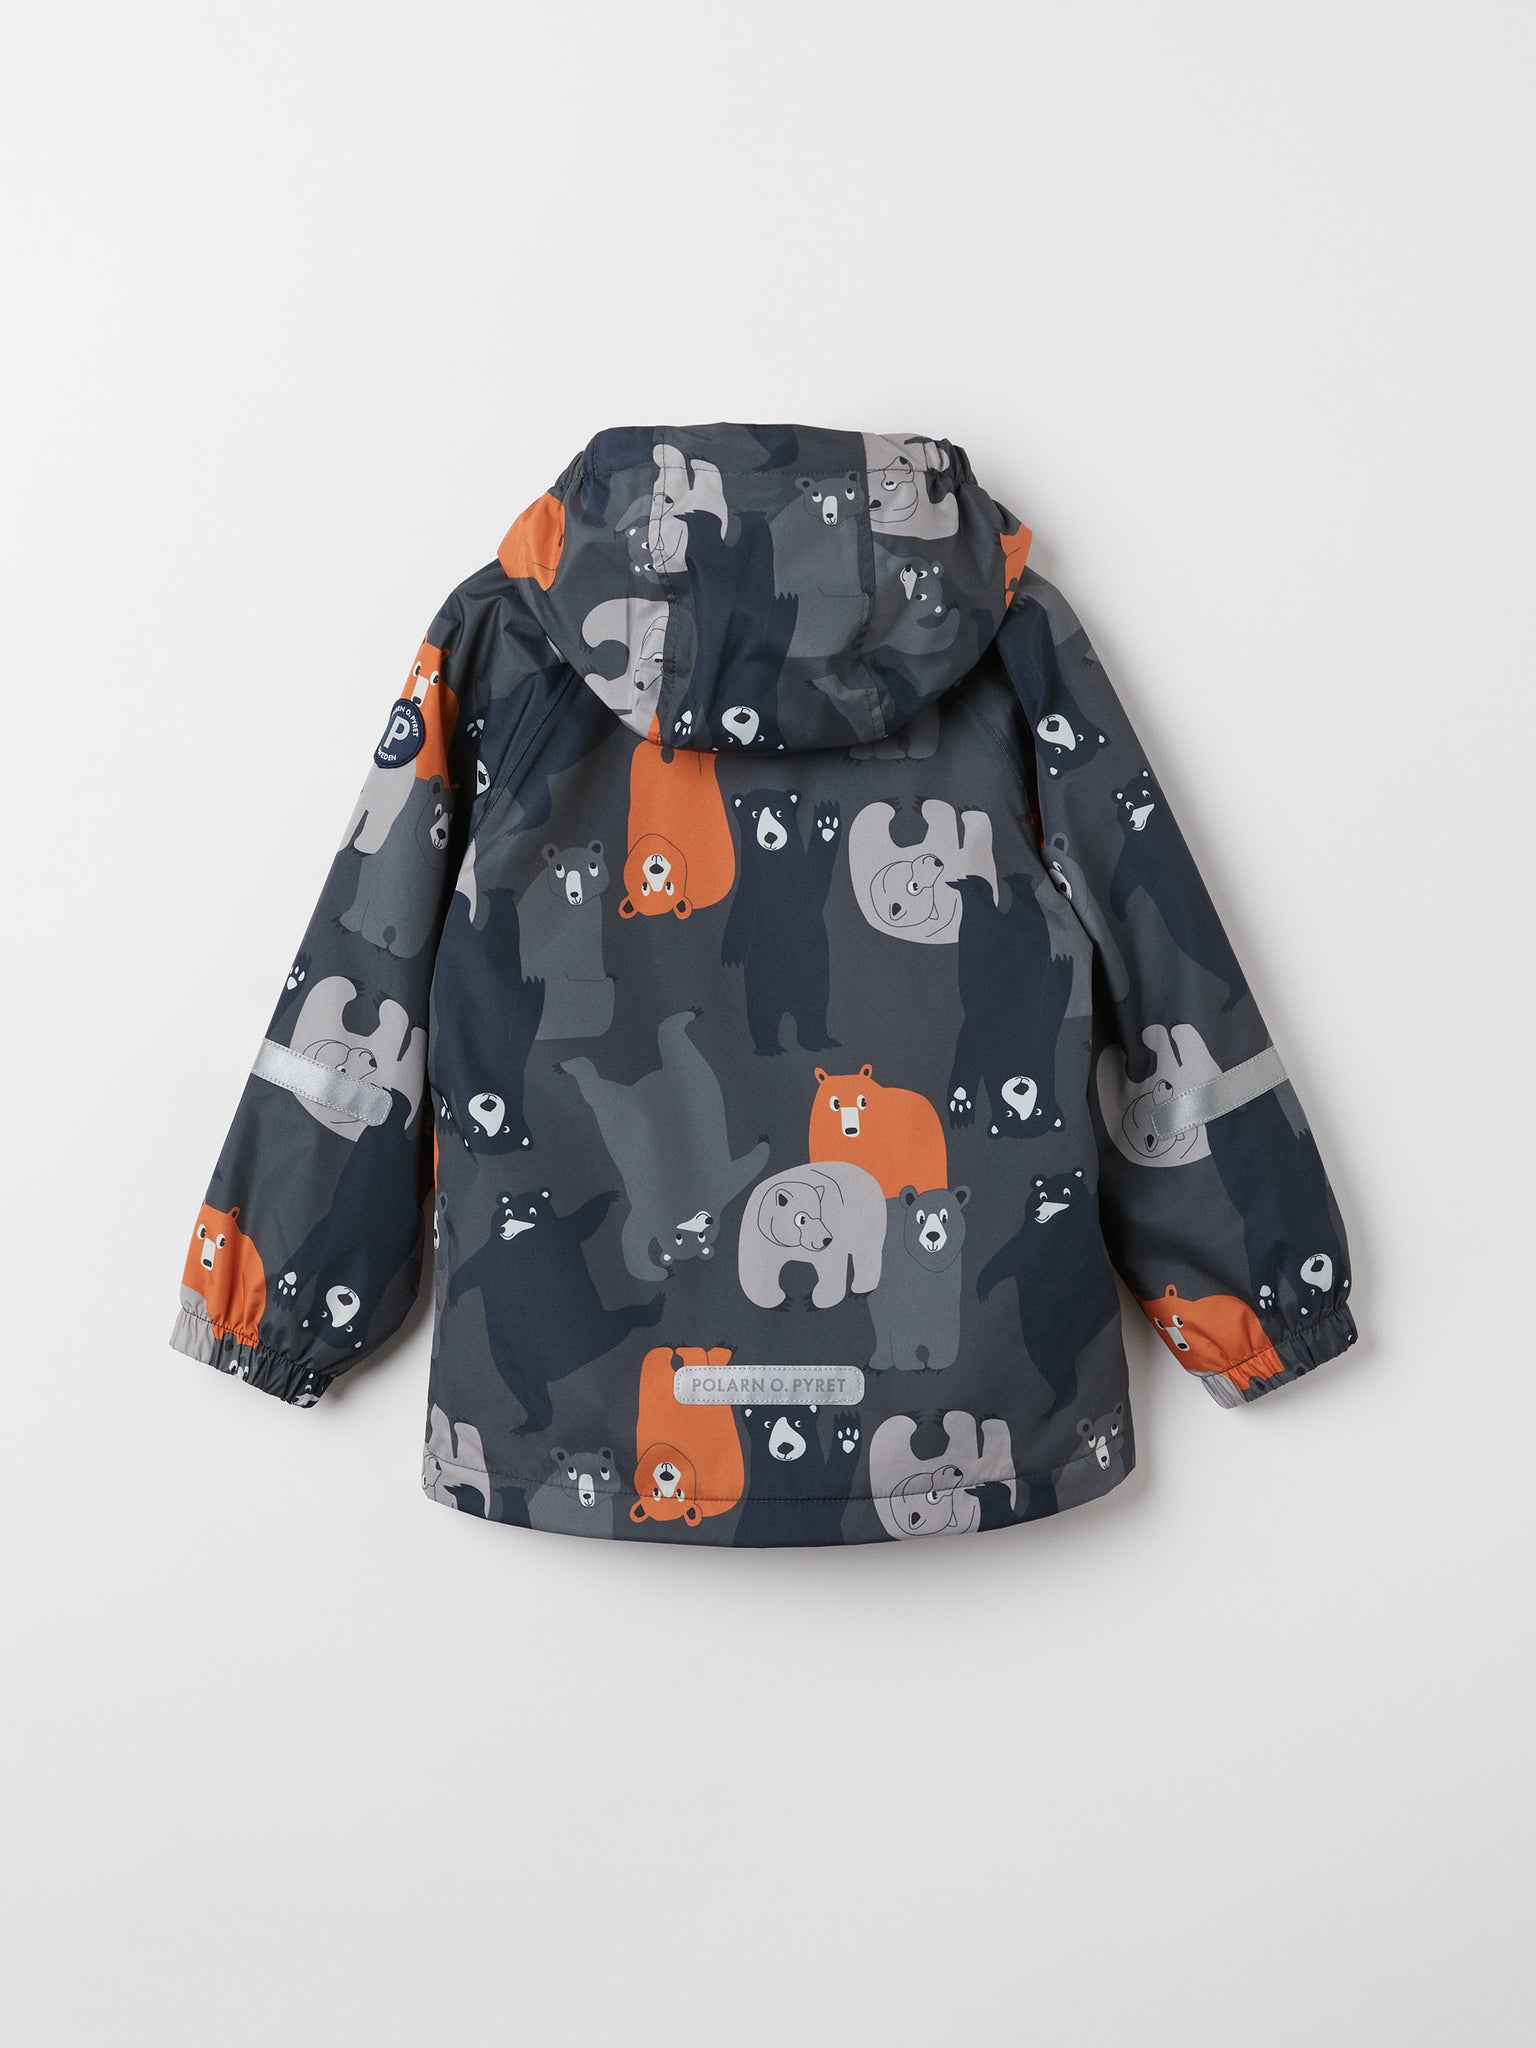 Kids Grey Lightweight Shell Jacket from the Polarn O. Pyret outerwear collection. Ethically produced kids outerwear.